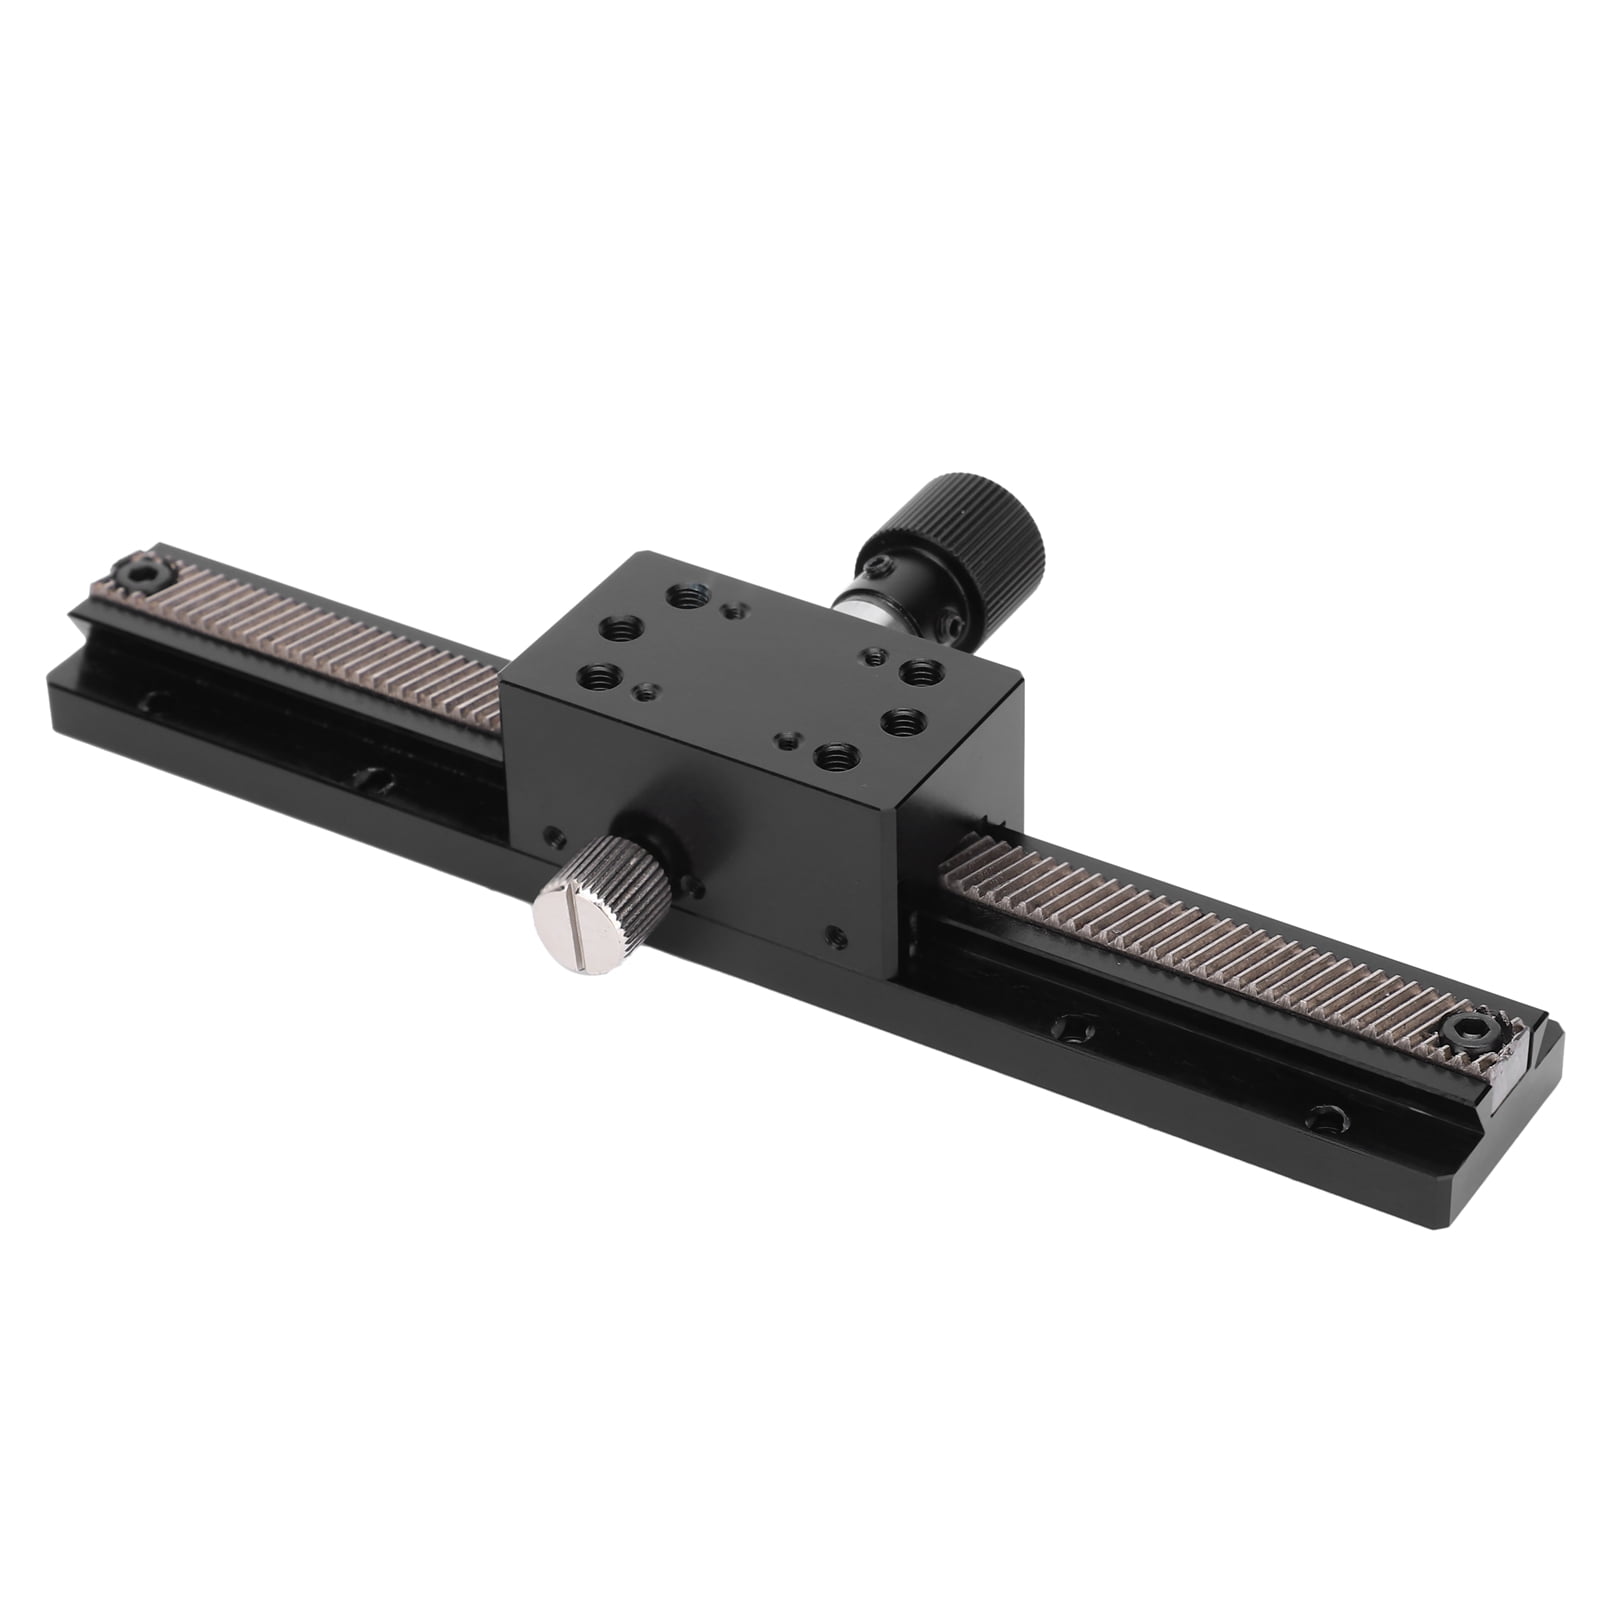 Manual Linear Stage Scratch‑Resistant Friction‑Resistant Drop‑Resistant for Industry Safety Rack Guide Manual Platform X-Axis Linear Stage